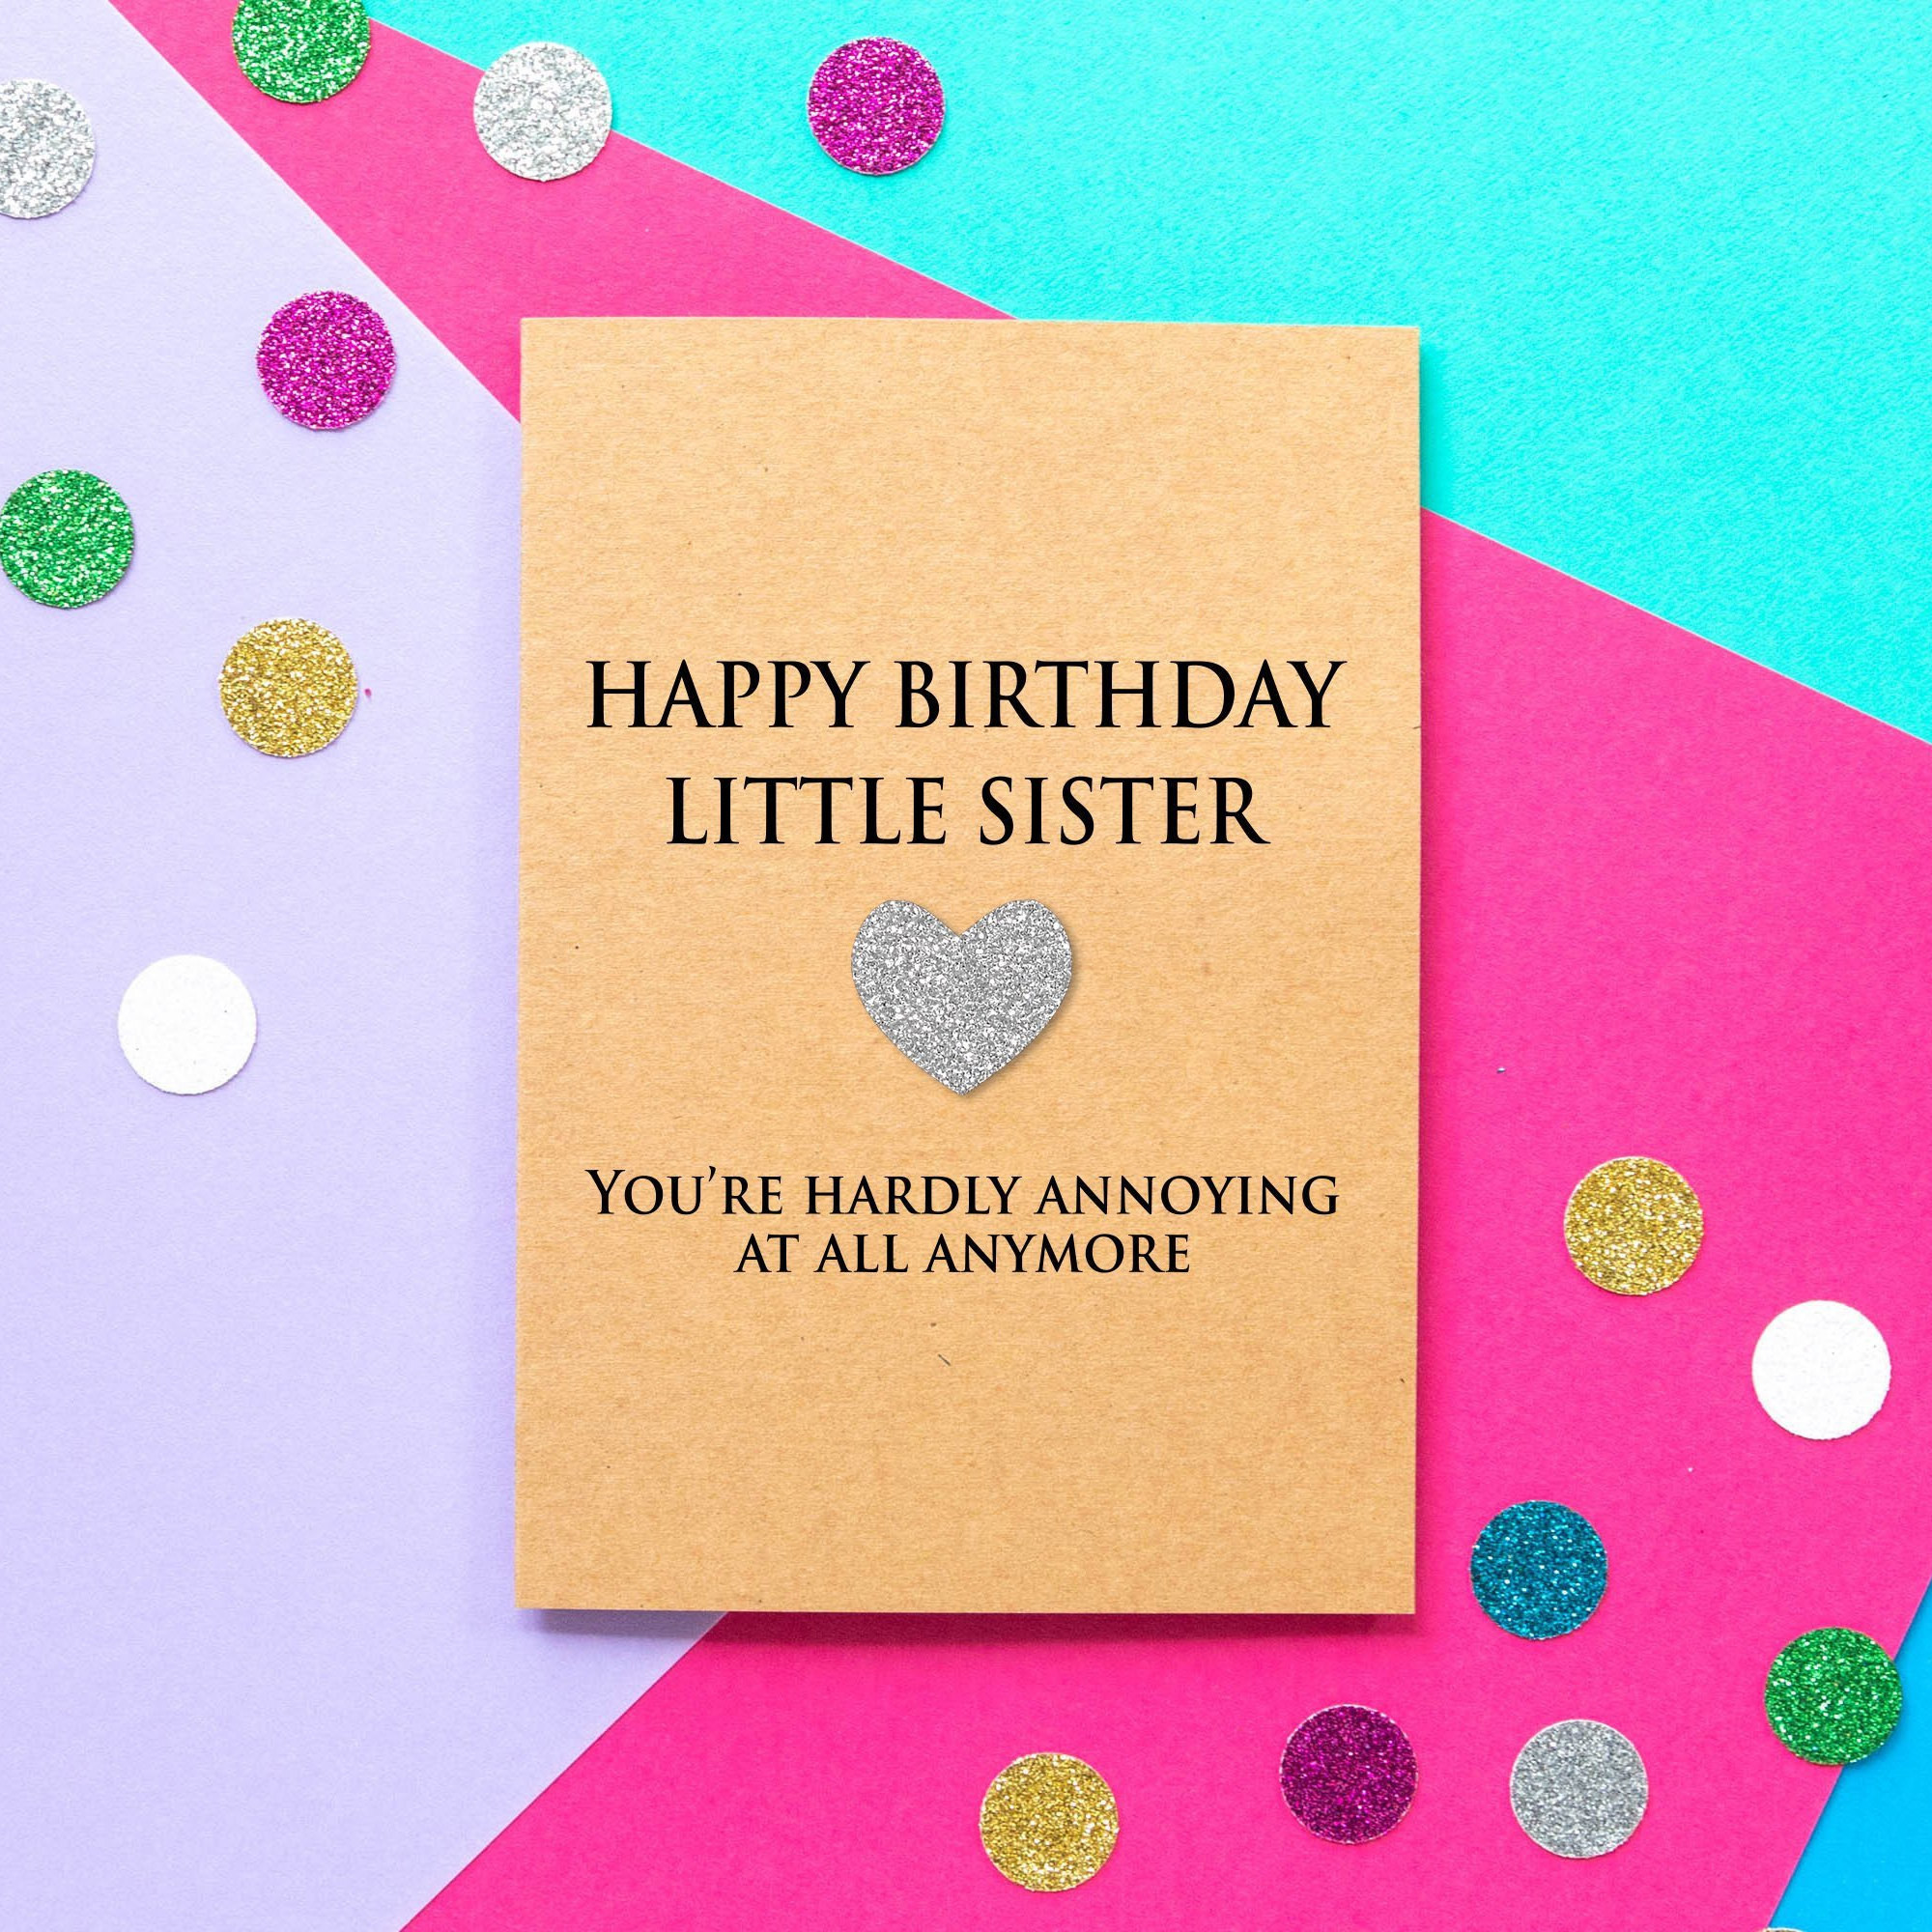 Funny Birthday Card For Sister
 Funny Little Sister Birthday Card You re Hardly Annoying